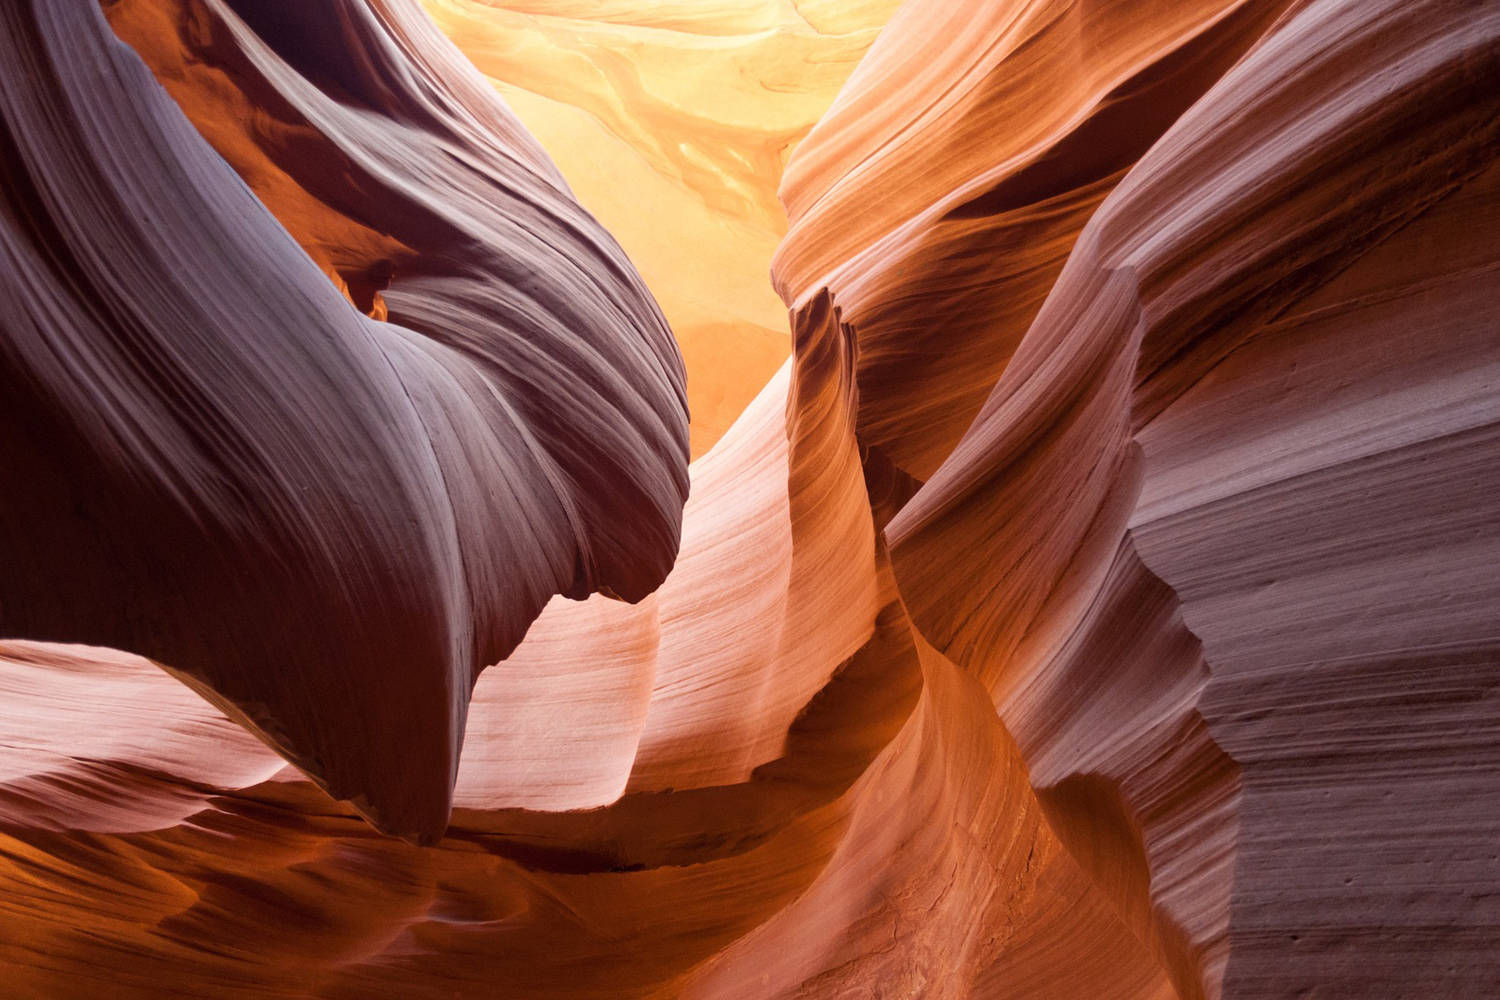 Free Canyon Wallpaper Downloads, [100+] Canyon Wallpapers for FREE |  